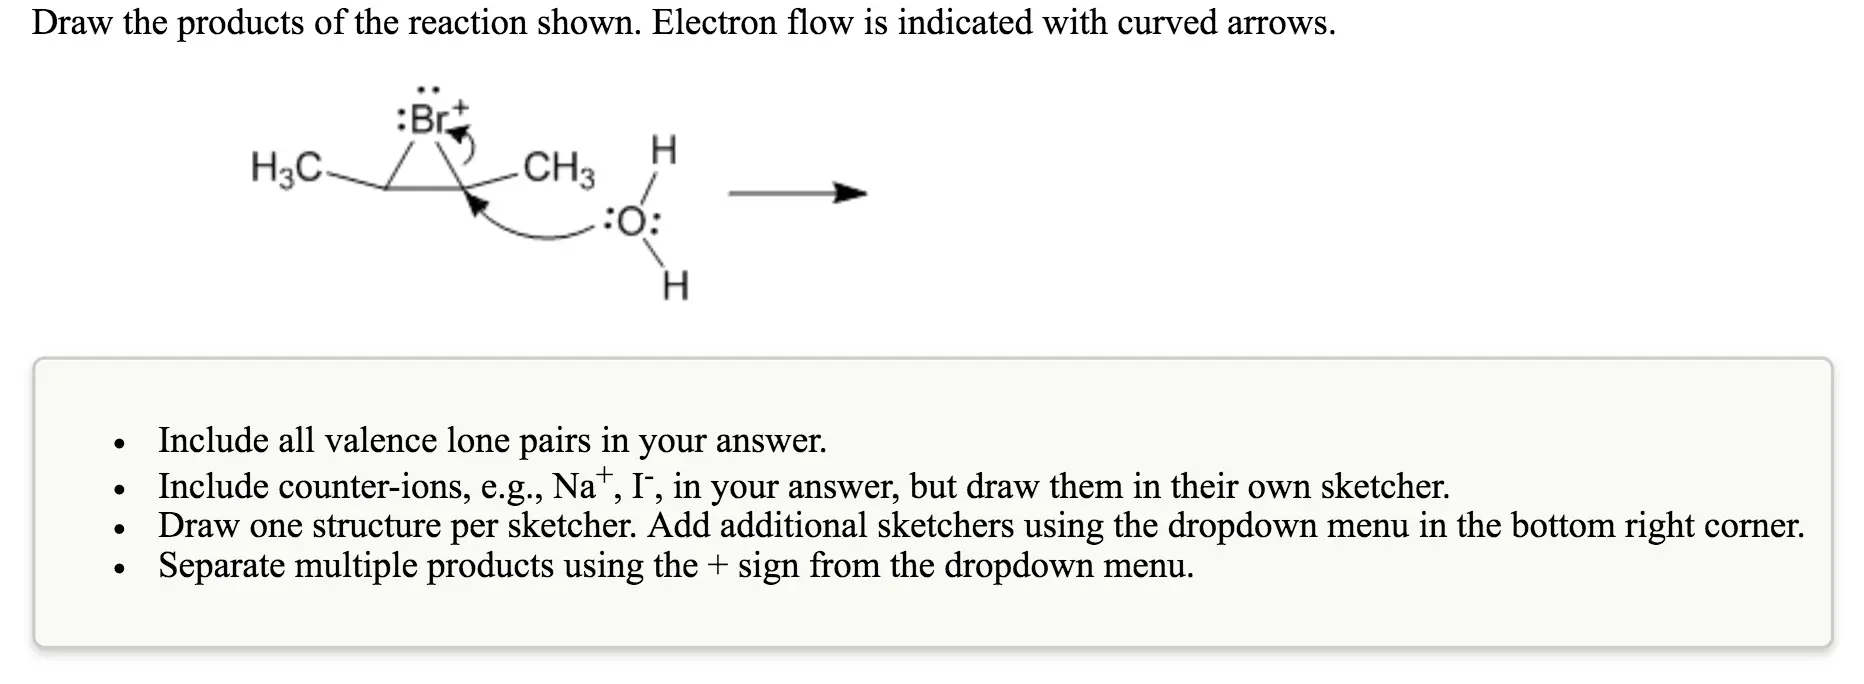 Draw the products of the reaction shown.
Electron flow is indicated with curved arrows.
Draw the products of the reaction shown. Electron flow is indicated with curved arrows. Include all valence lone pairs in your answer. Include counter-ions, e.g., Na+, I, in your answer, but draw them in their own sketcher. Draw one structure per sketcher. Add additional sketchers using the dropdown menu in the bottom right corner. Separate multiple products using the + sign from the dropdown menu.